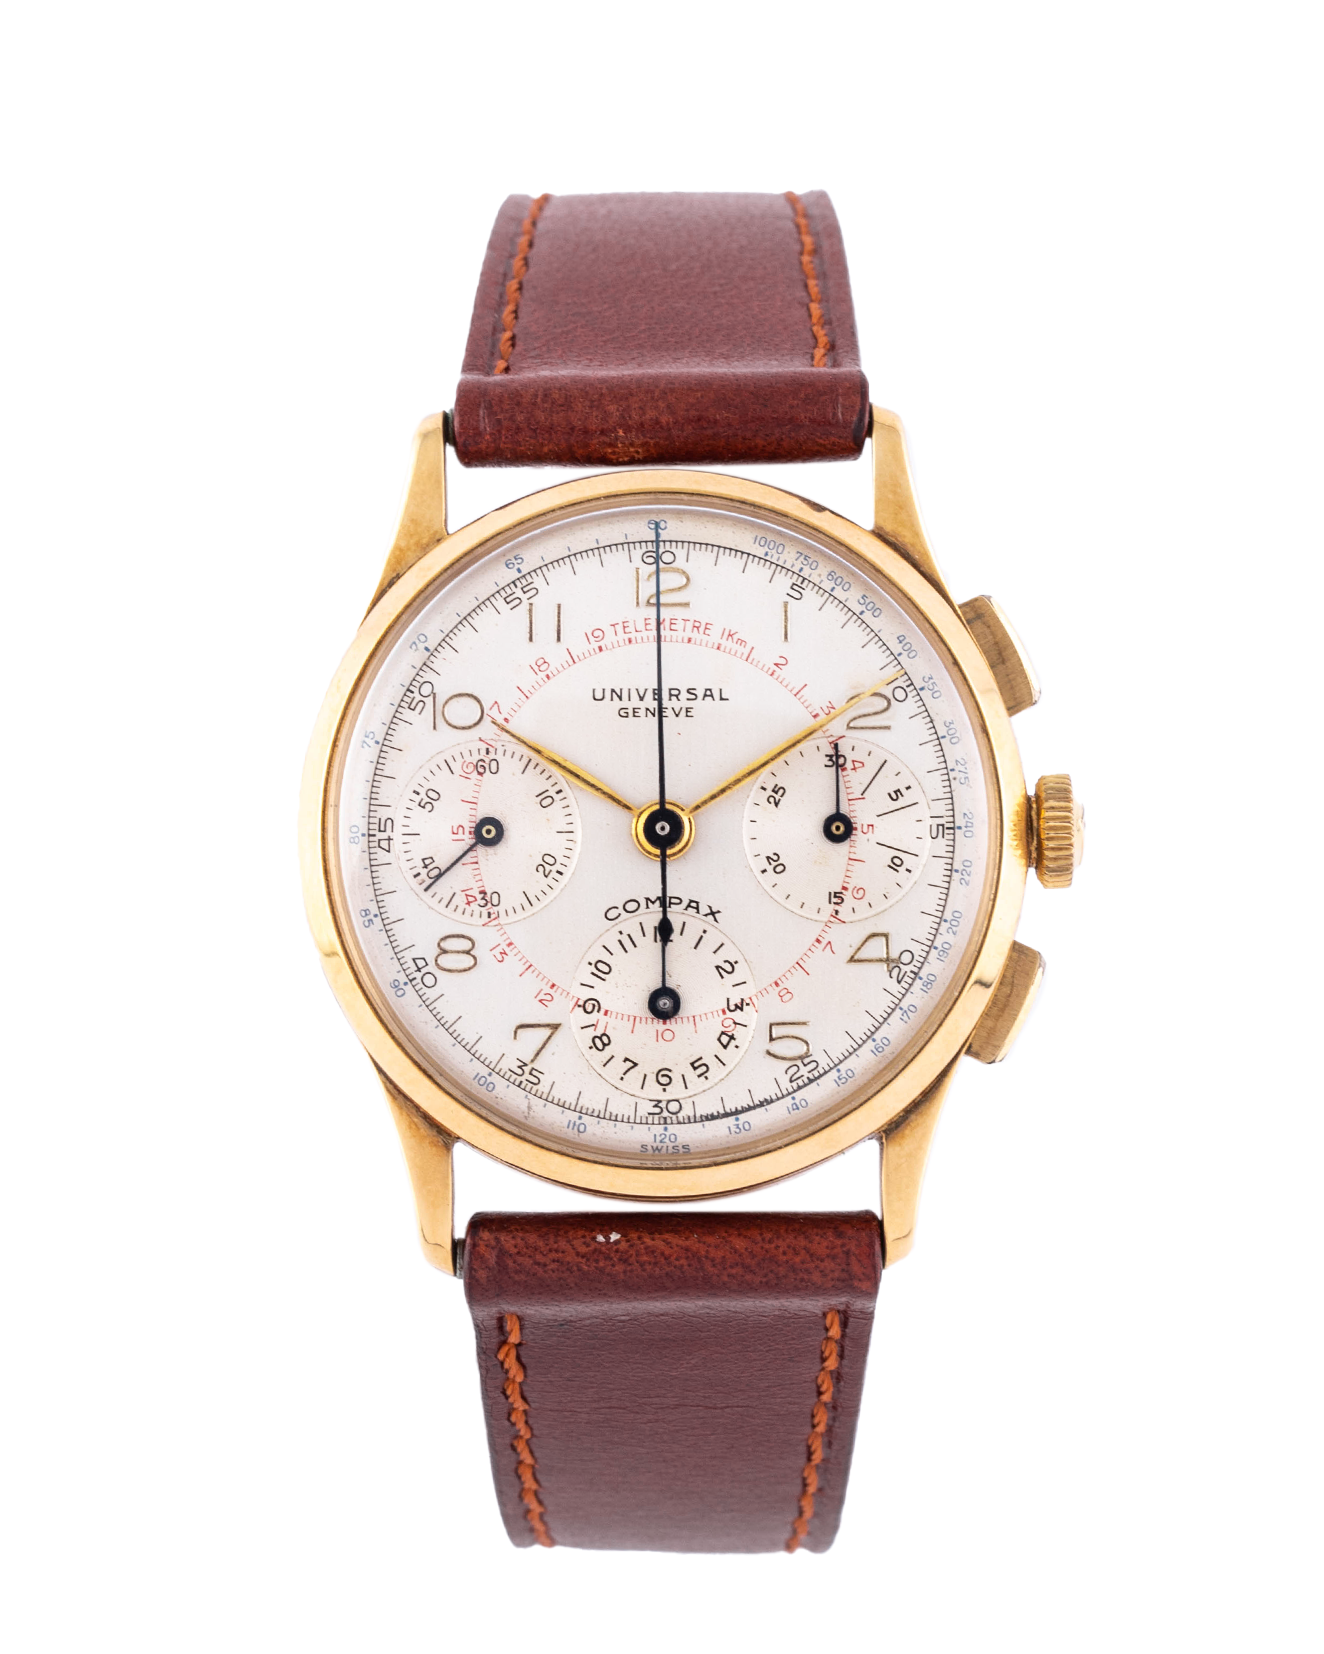 Universal Genève Ref. 12494 Compax - yellow gold with white dial